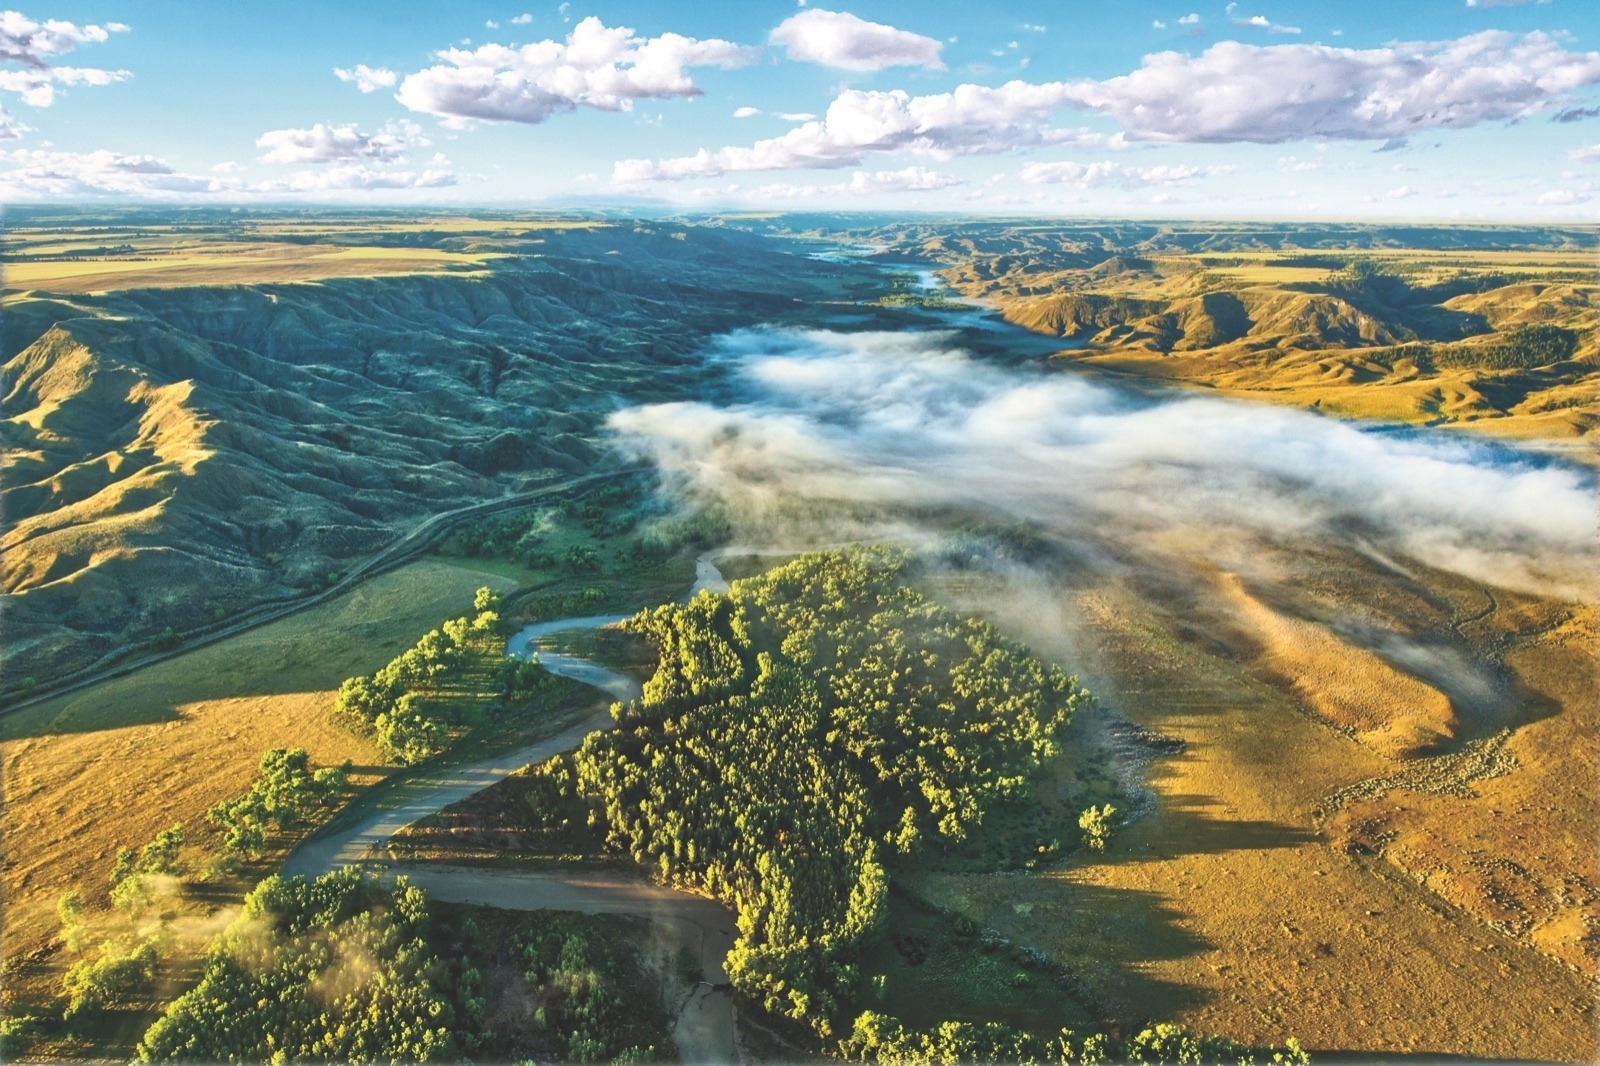 The Judith River is one of the many high plains tributaries of Upper Missouri River and one of many hidden scenic gems rewarding those who venture out onto the prairie. Photo courtesy Gib Myers